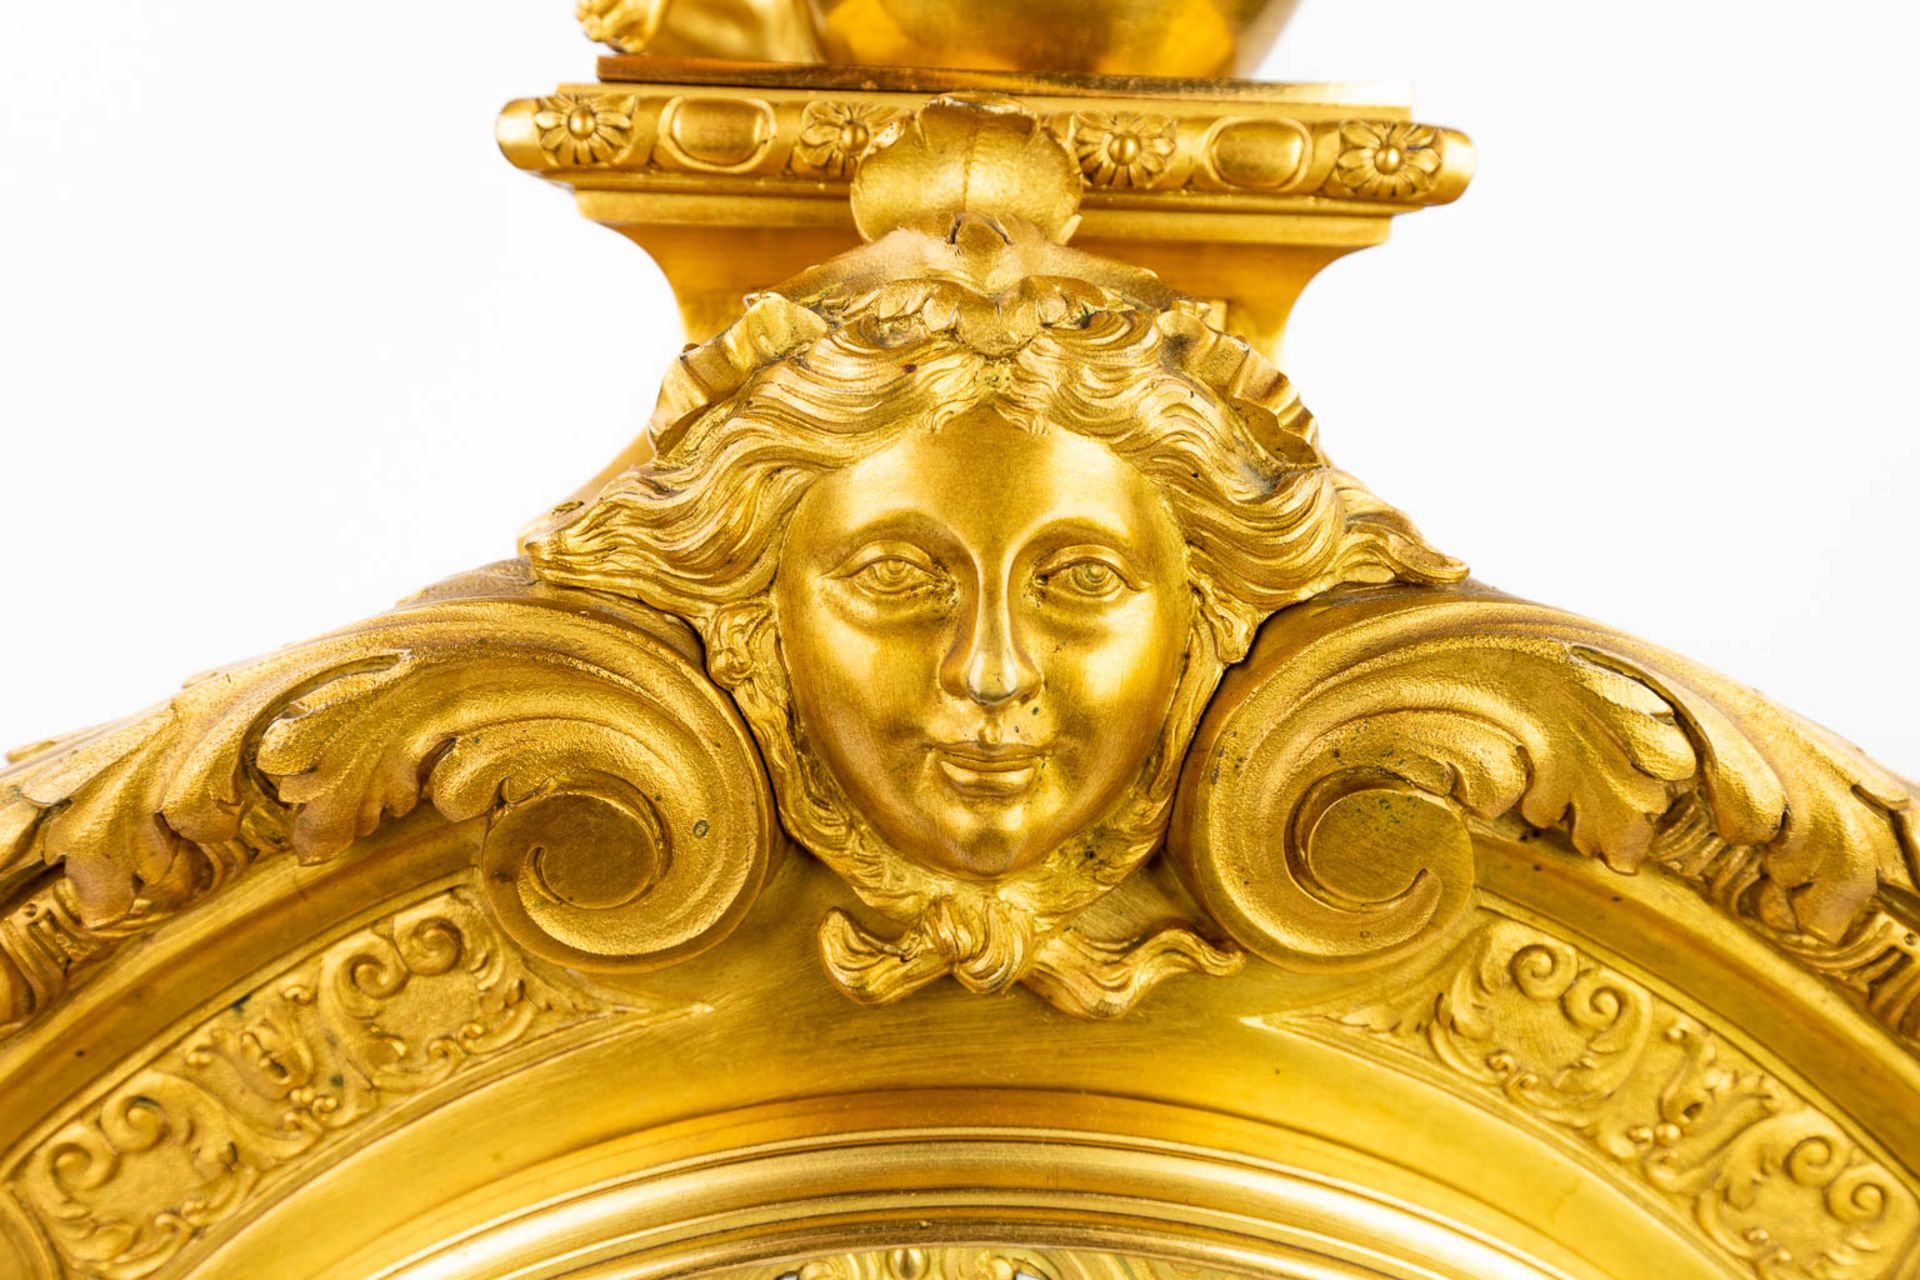 A large mantle clock 'Father Time' made of gilt bronze in Louis XVI style. (18 x 40 x 74cm) - Image 10 of 14